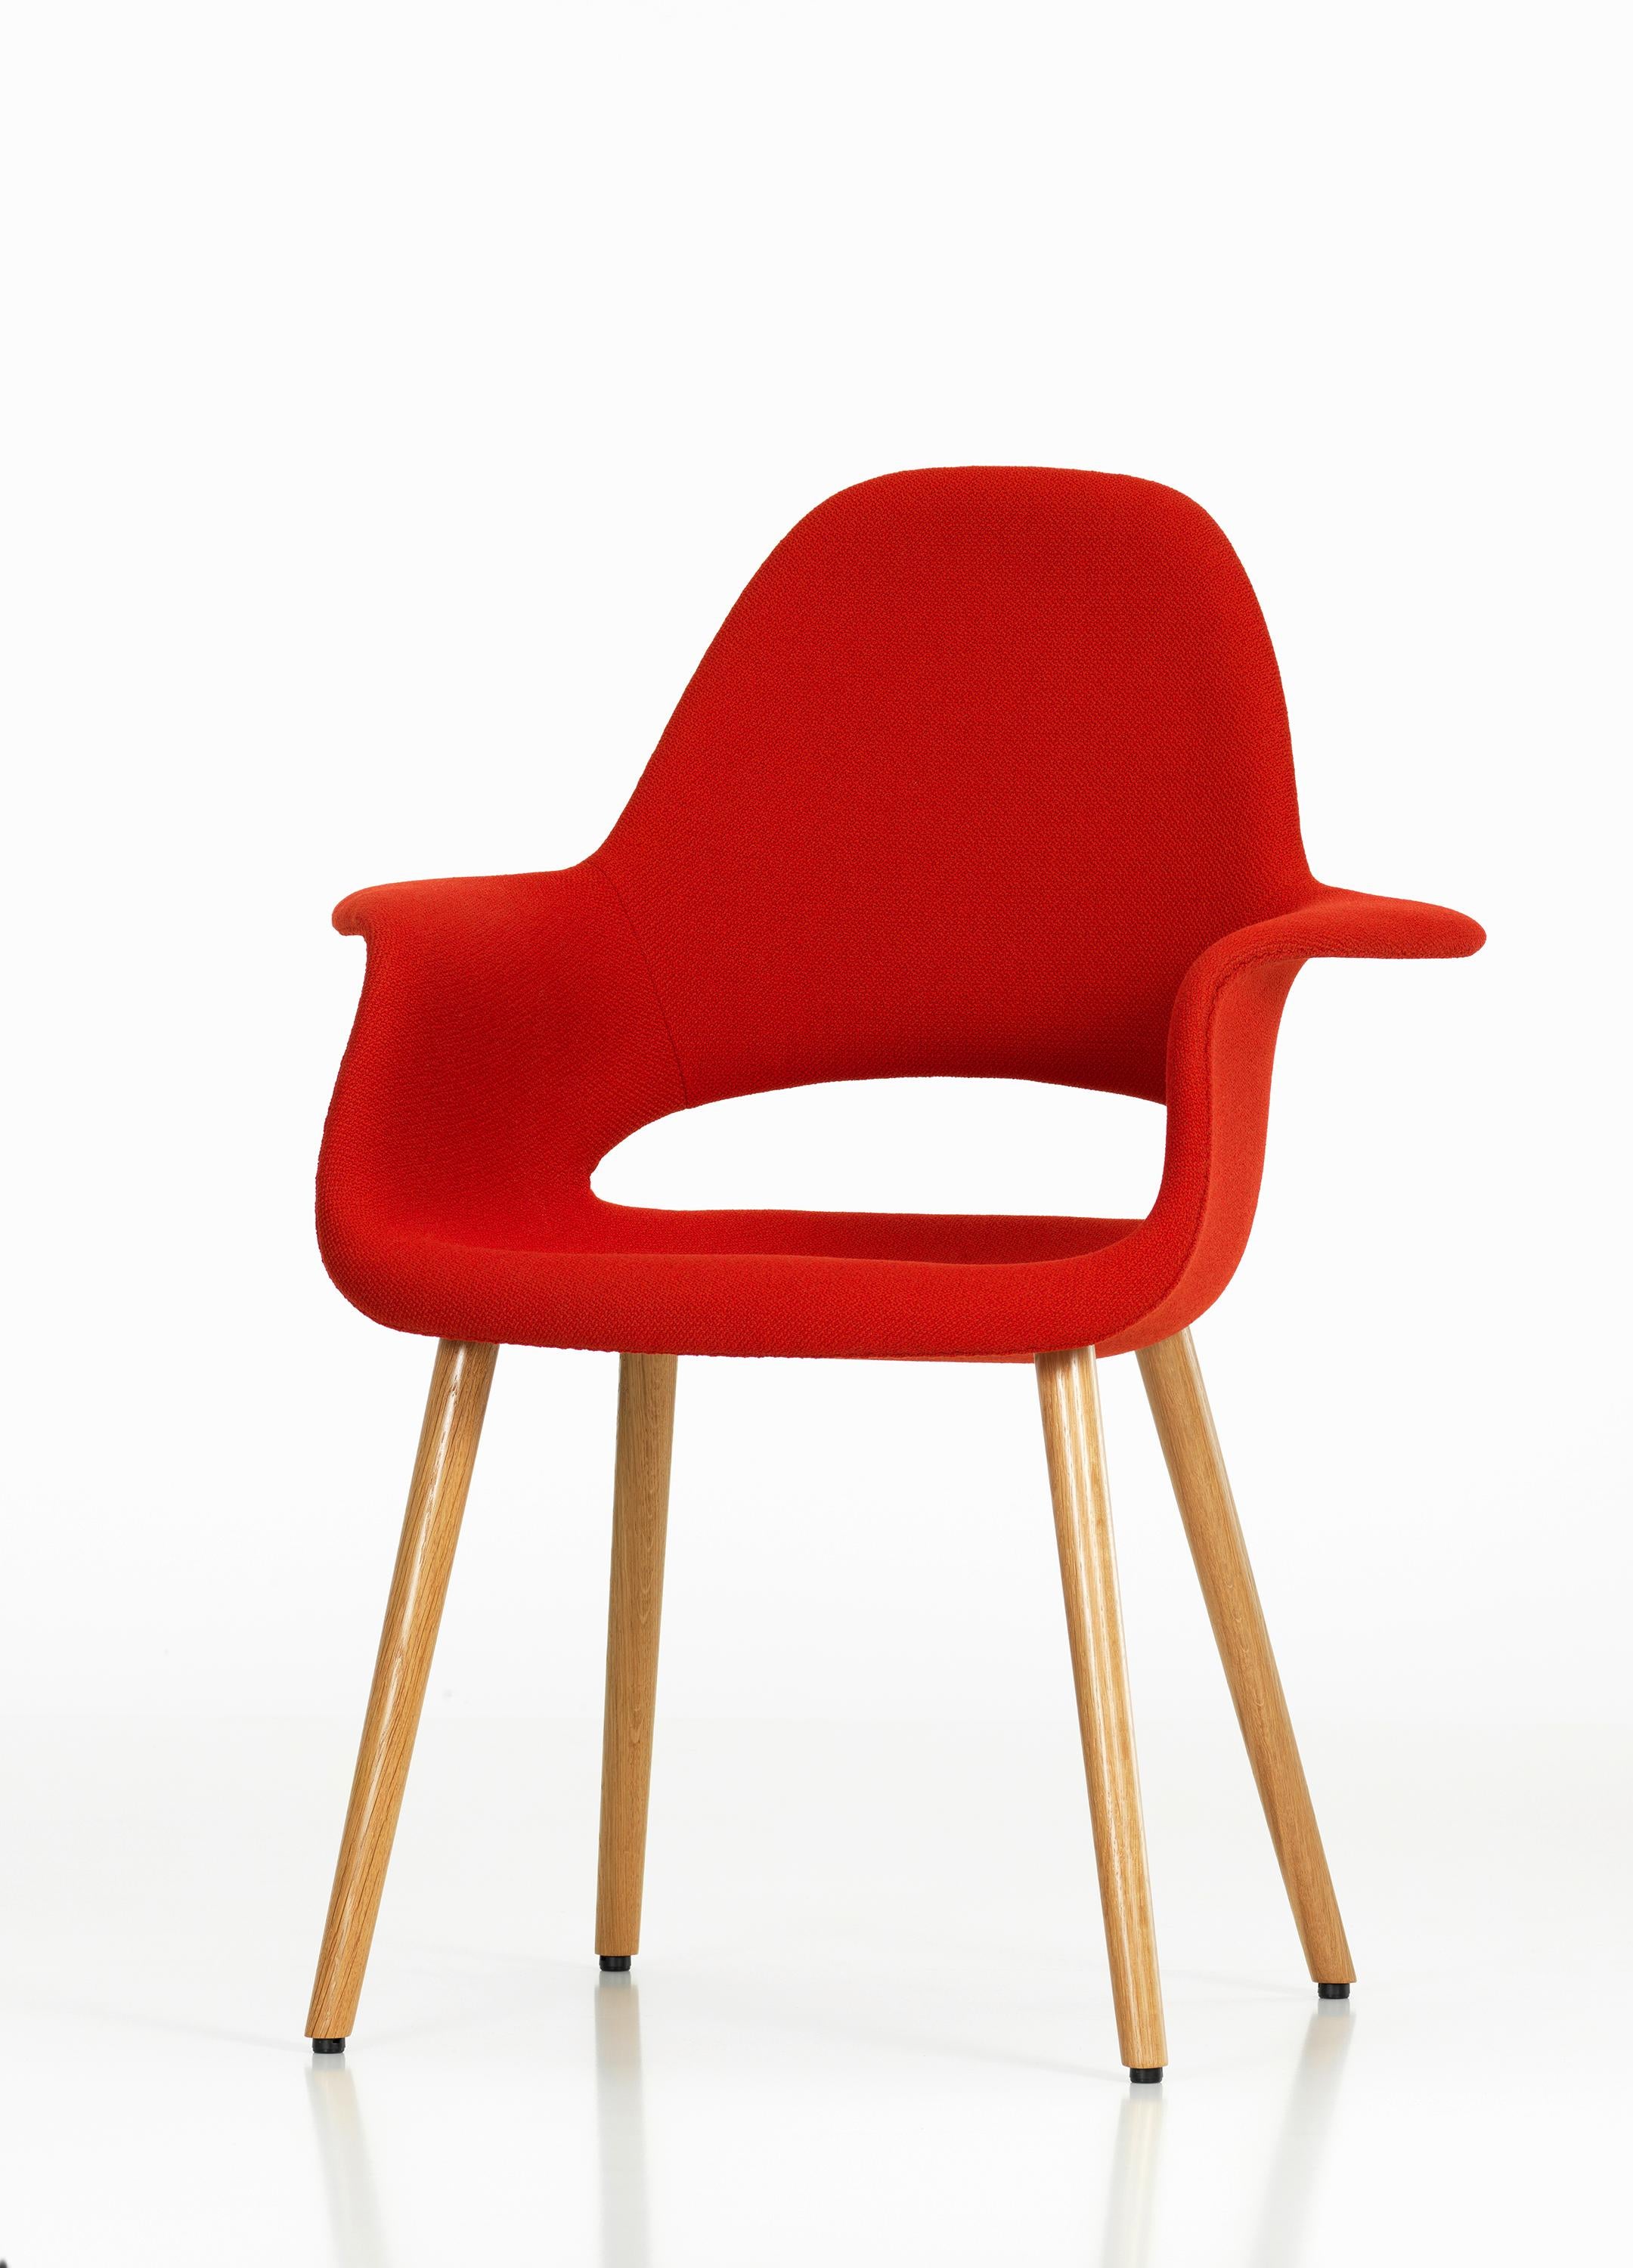 Swiss Vitra Organic Conference Chair in Red Chilli by Charles Eames & Eero Saarinen For Sale